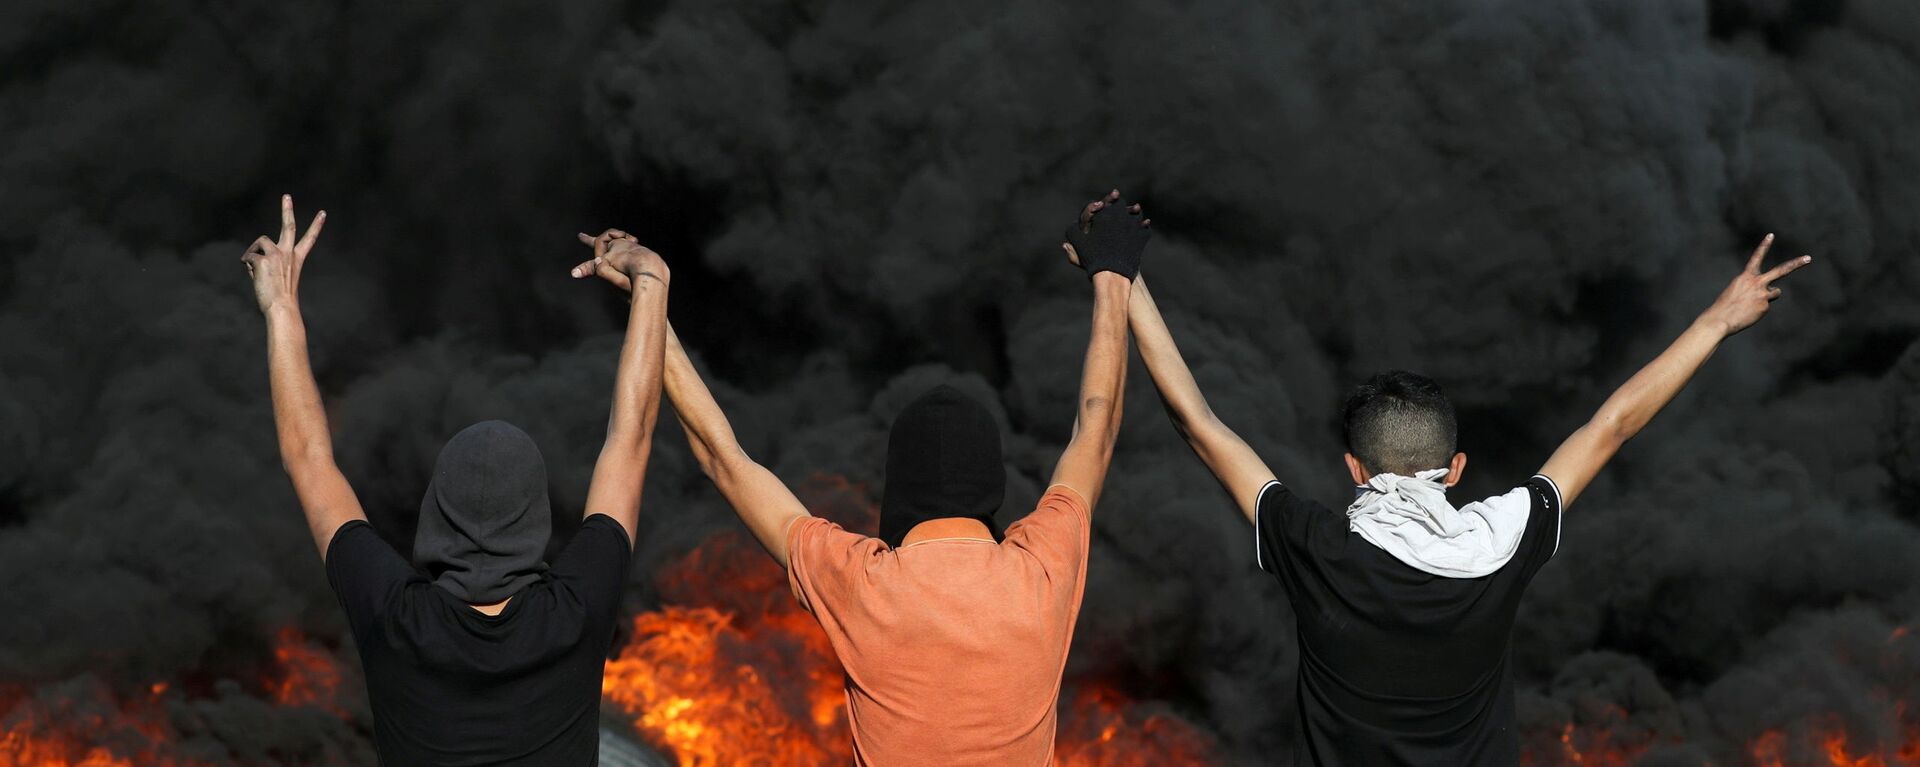 Palestinian demonstrators look at burning tyres during a protest over tensions in Jerusalem and Israel-Gaza escalation, in the Israeli-occupied West Bank, 16 May 2021. - Sputnik International, 1920, 30.12.2021